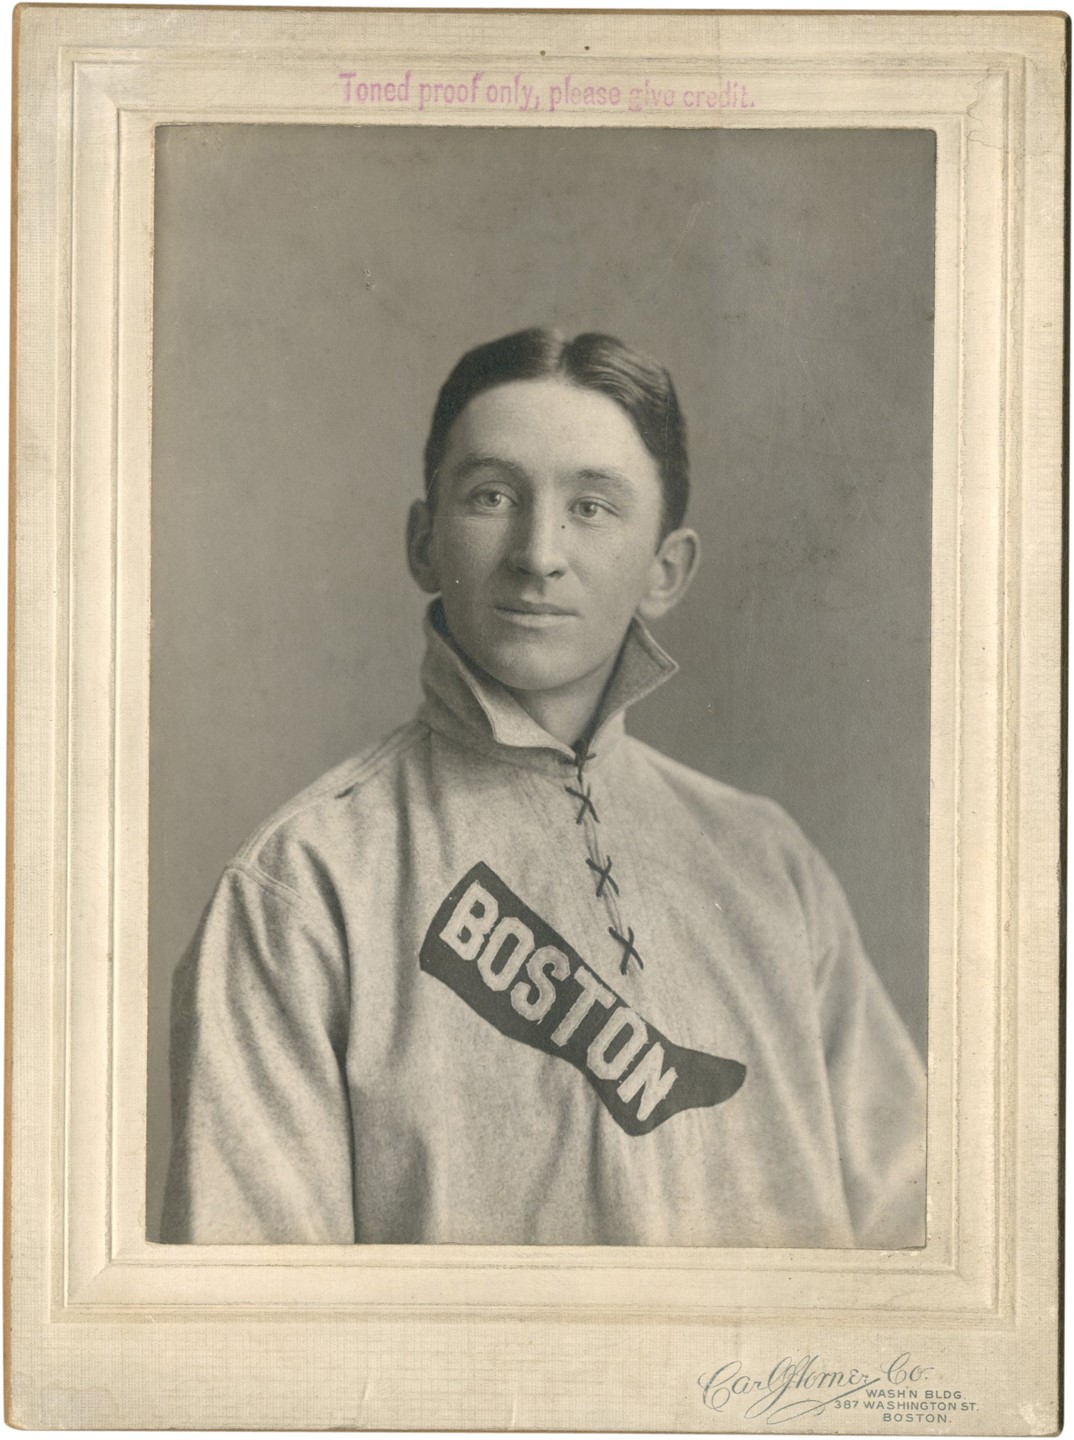 Boston Sports - Pat Donahue Boston Red Sox Photograph by Carl Horner (Used For 1909 T204 Ramly Jiggs Donahue Card)